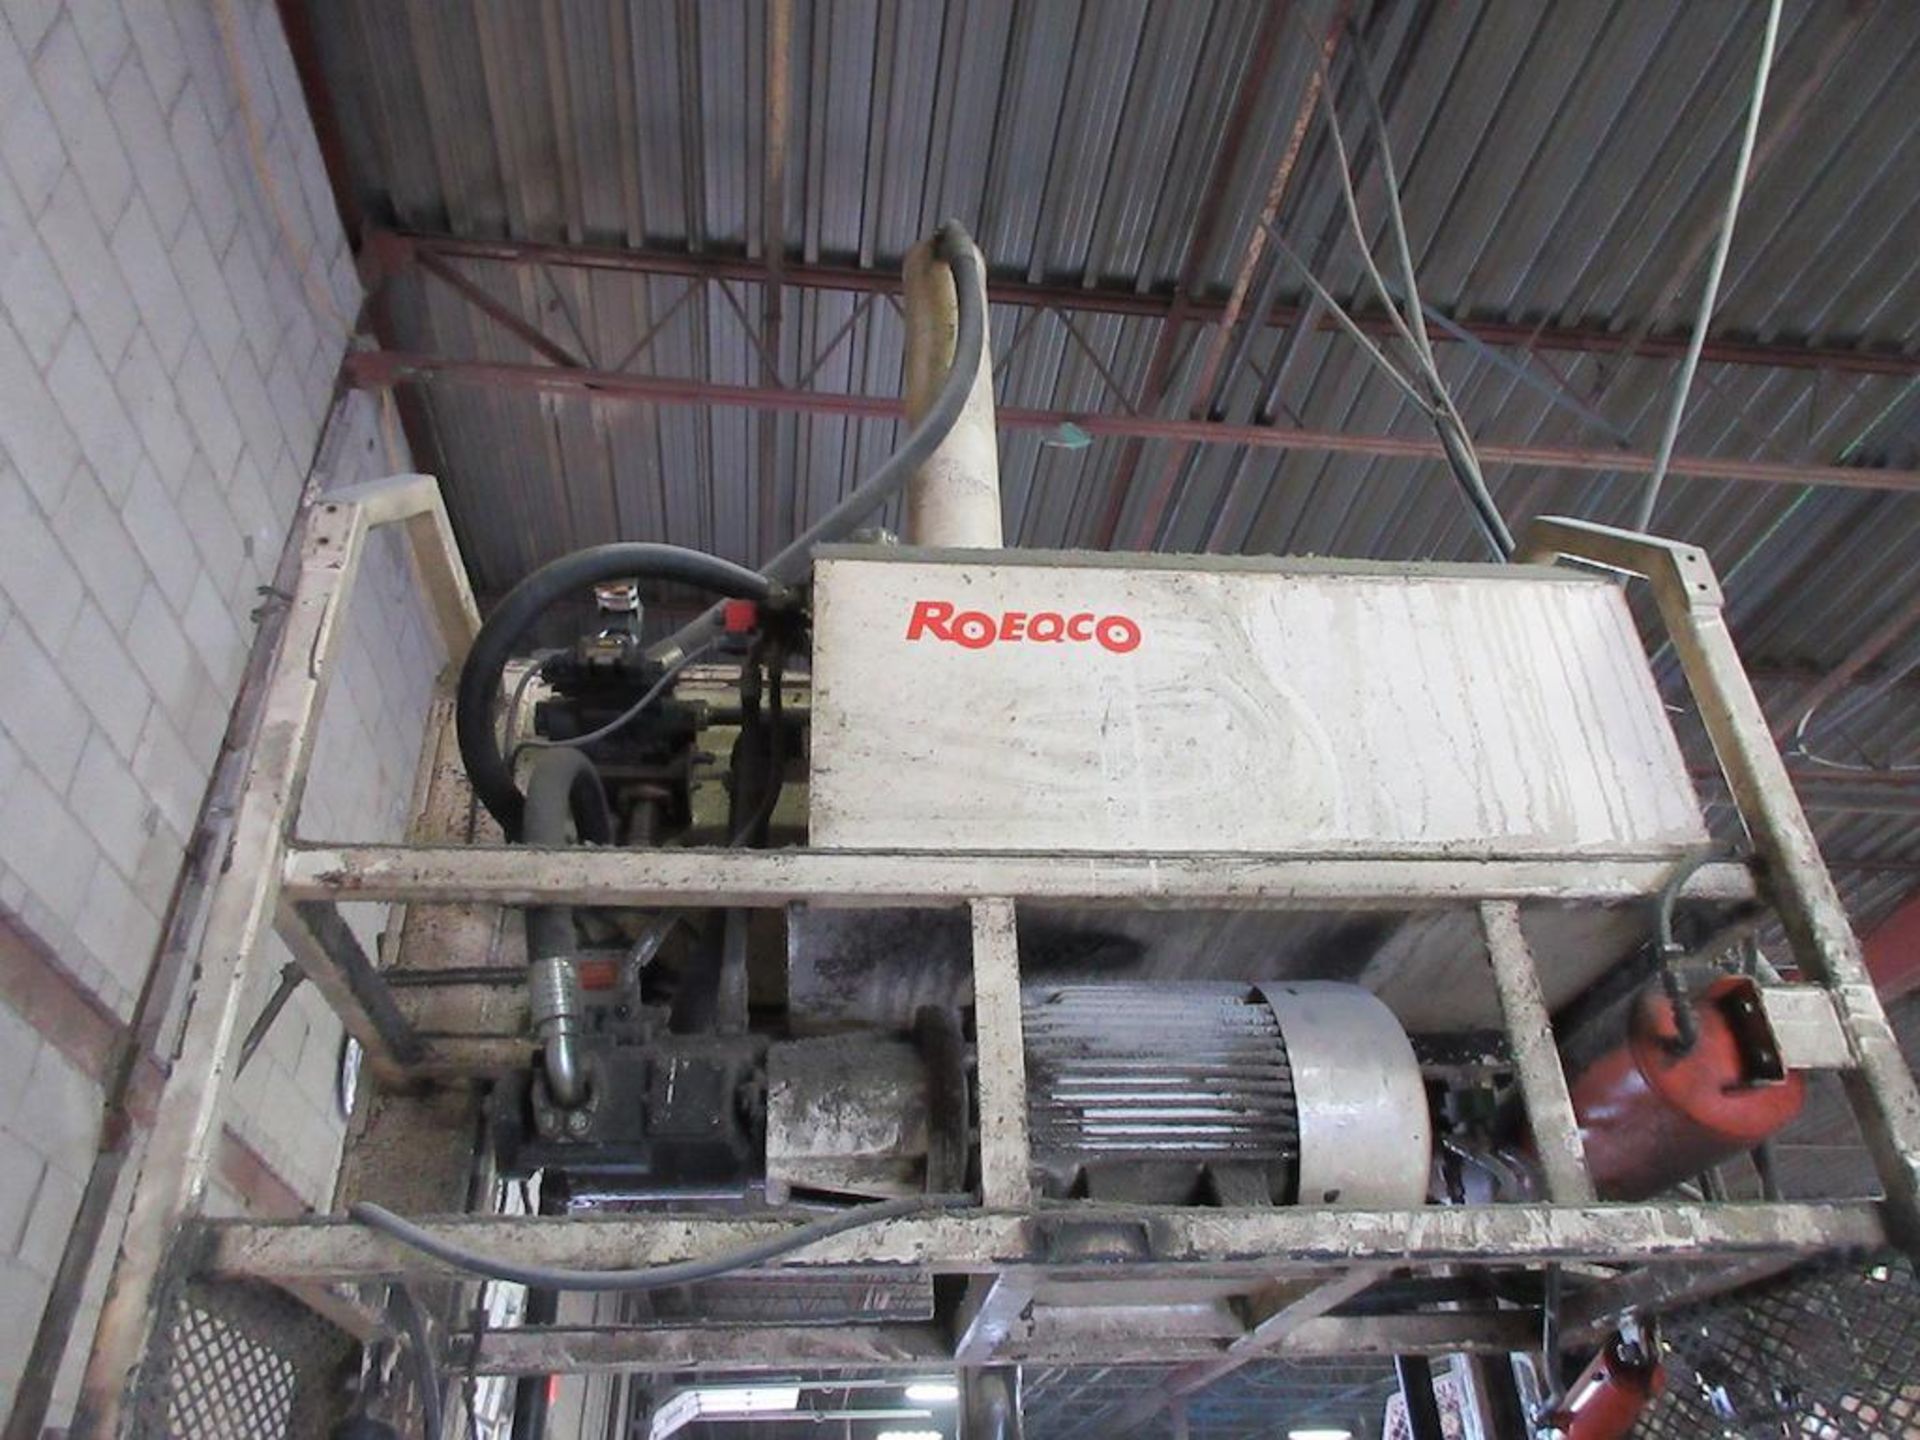 2001 ROEQCO (Rolling Equipment Company Inc) Guillotine, 5' blade, Model HS 115-66-218, sn 115-01-01- - Image 8 of 8